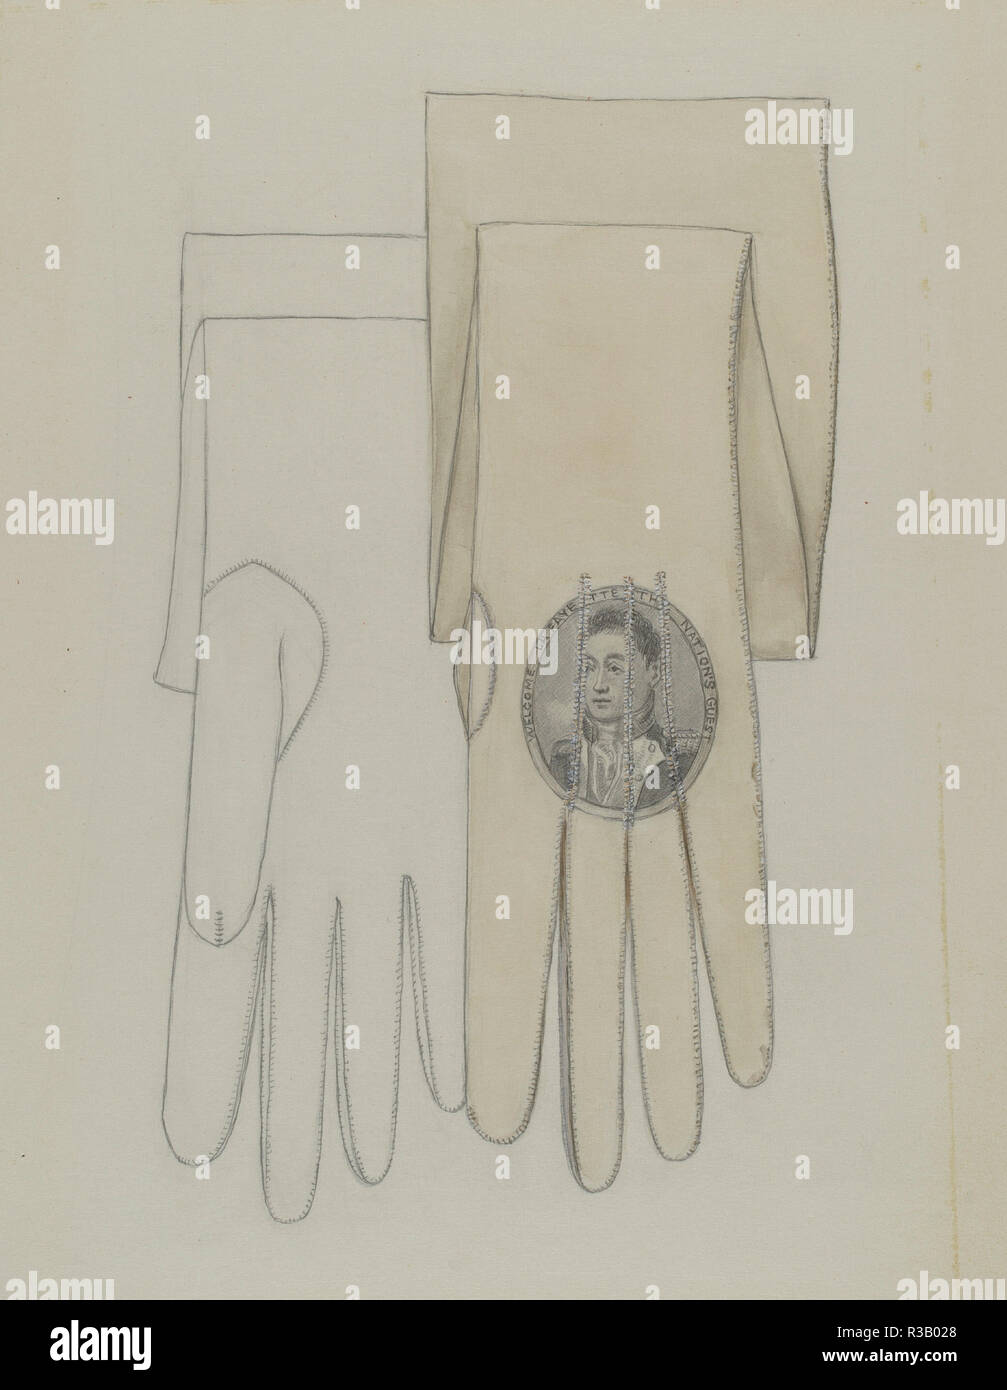 Wedding Gloves. Dated: 1935/1942. Dimensions: overall: 29.8 x 22.9 cm (11 3/4 x 9 in.). Medium: watercolor and graphite on paperboard. Museum: National Gallery of Art, Washington DC. Author: Jessie M. Benge. Stock Photo